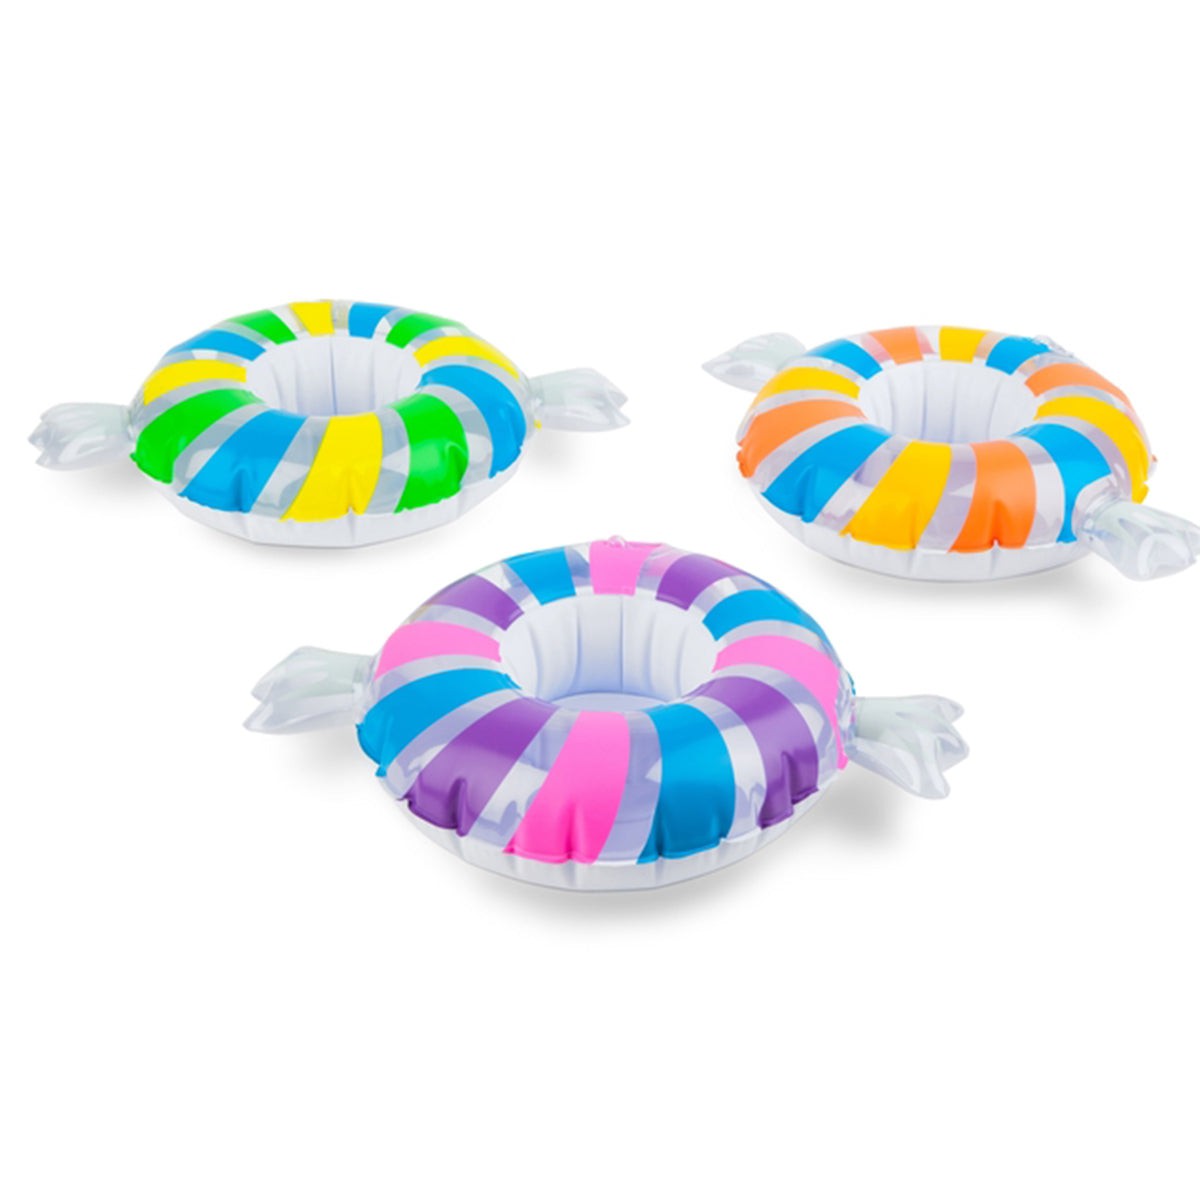 STORTZ TOYS Summer Candy Drink Floats, 3 Count 817742021909